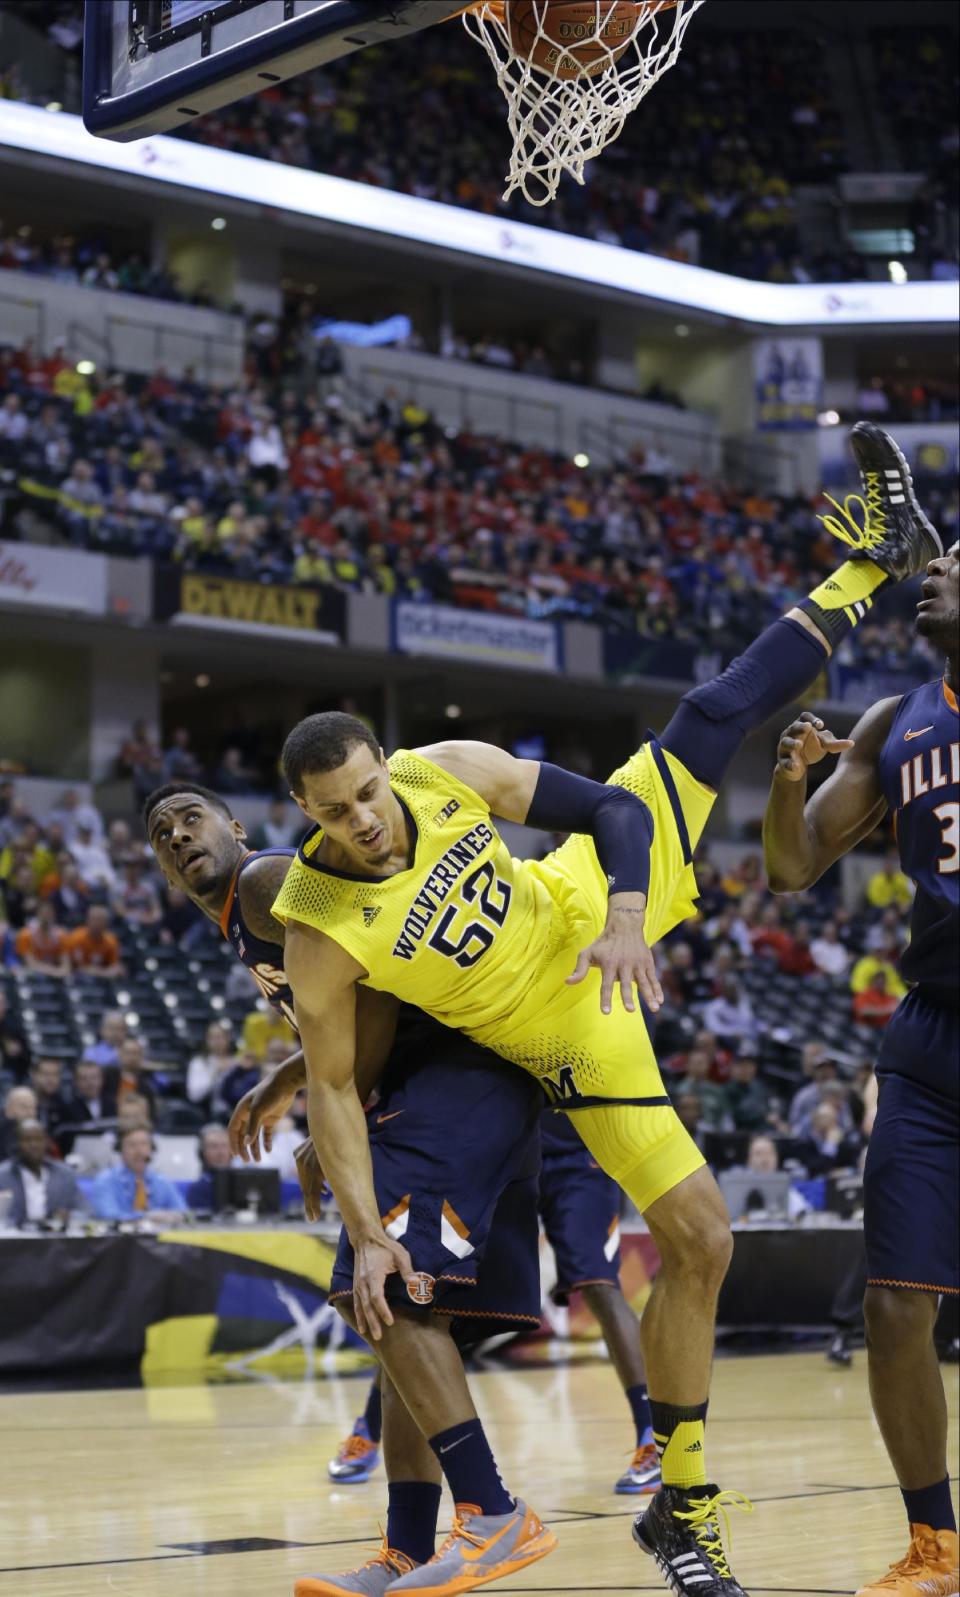 Michigan forward Jordan Morgan falls to the floor after scoring a basket against Illinois guard Rayvonte Rice, left, in the first half of an NCAA college basketball game in the quarter finals of the Big Ten Conference tournament Friday, March 14, 2014, in Indianapolis. (AP Photo/Michael Conroy)